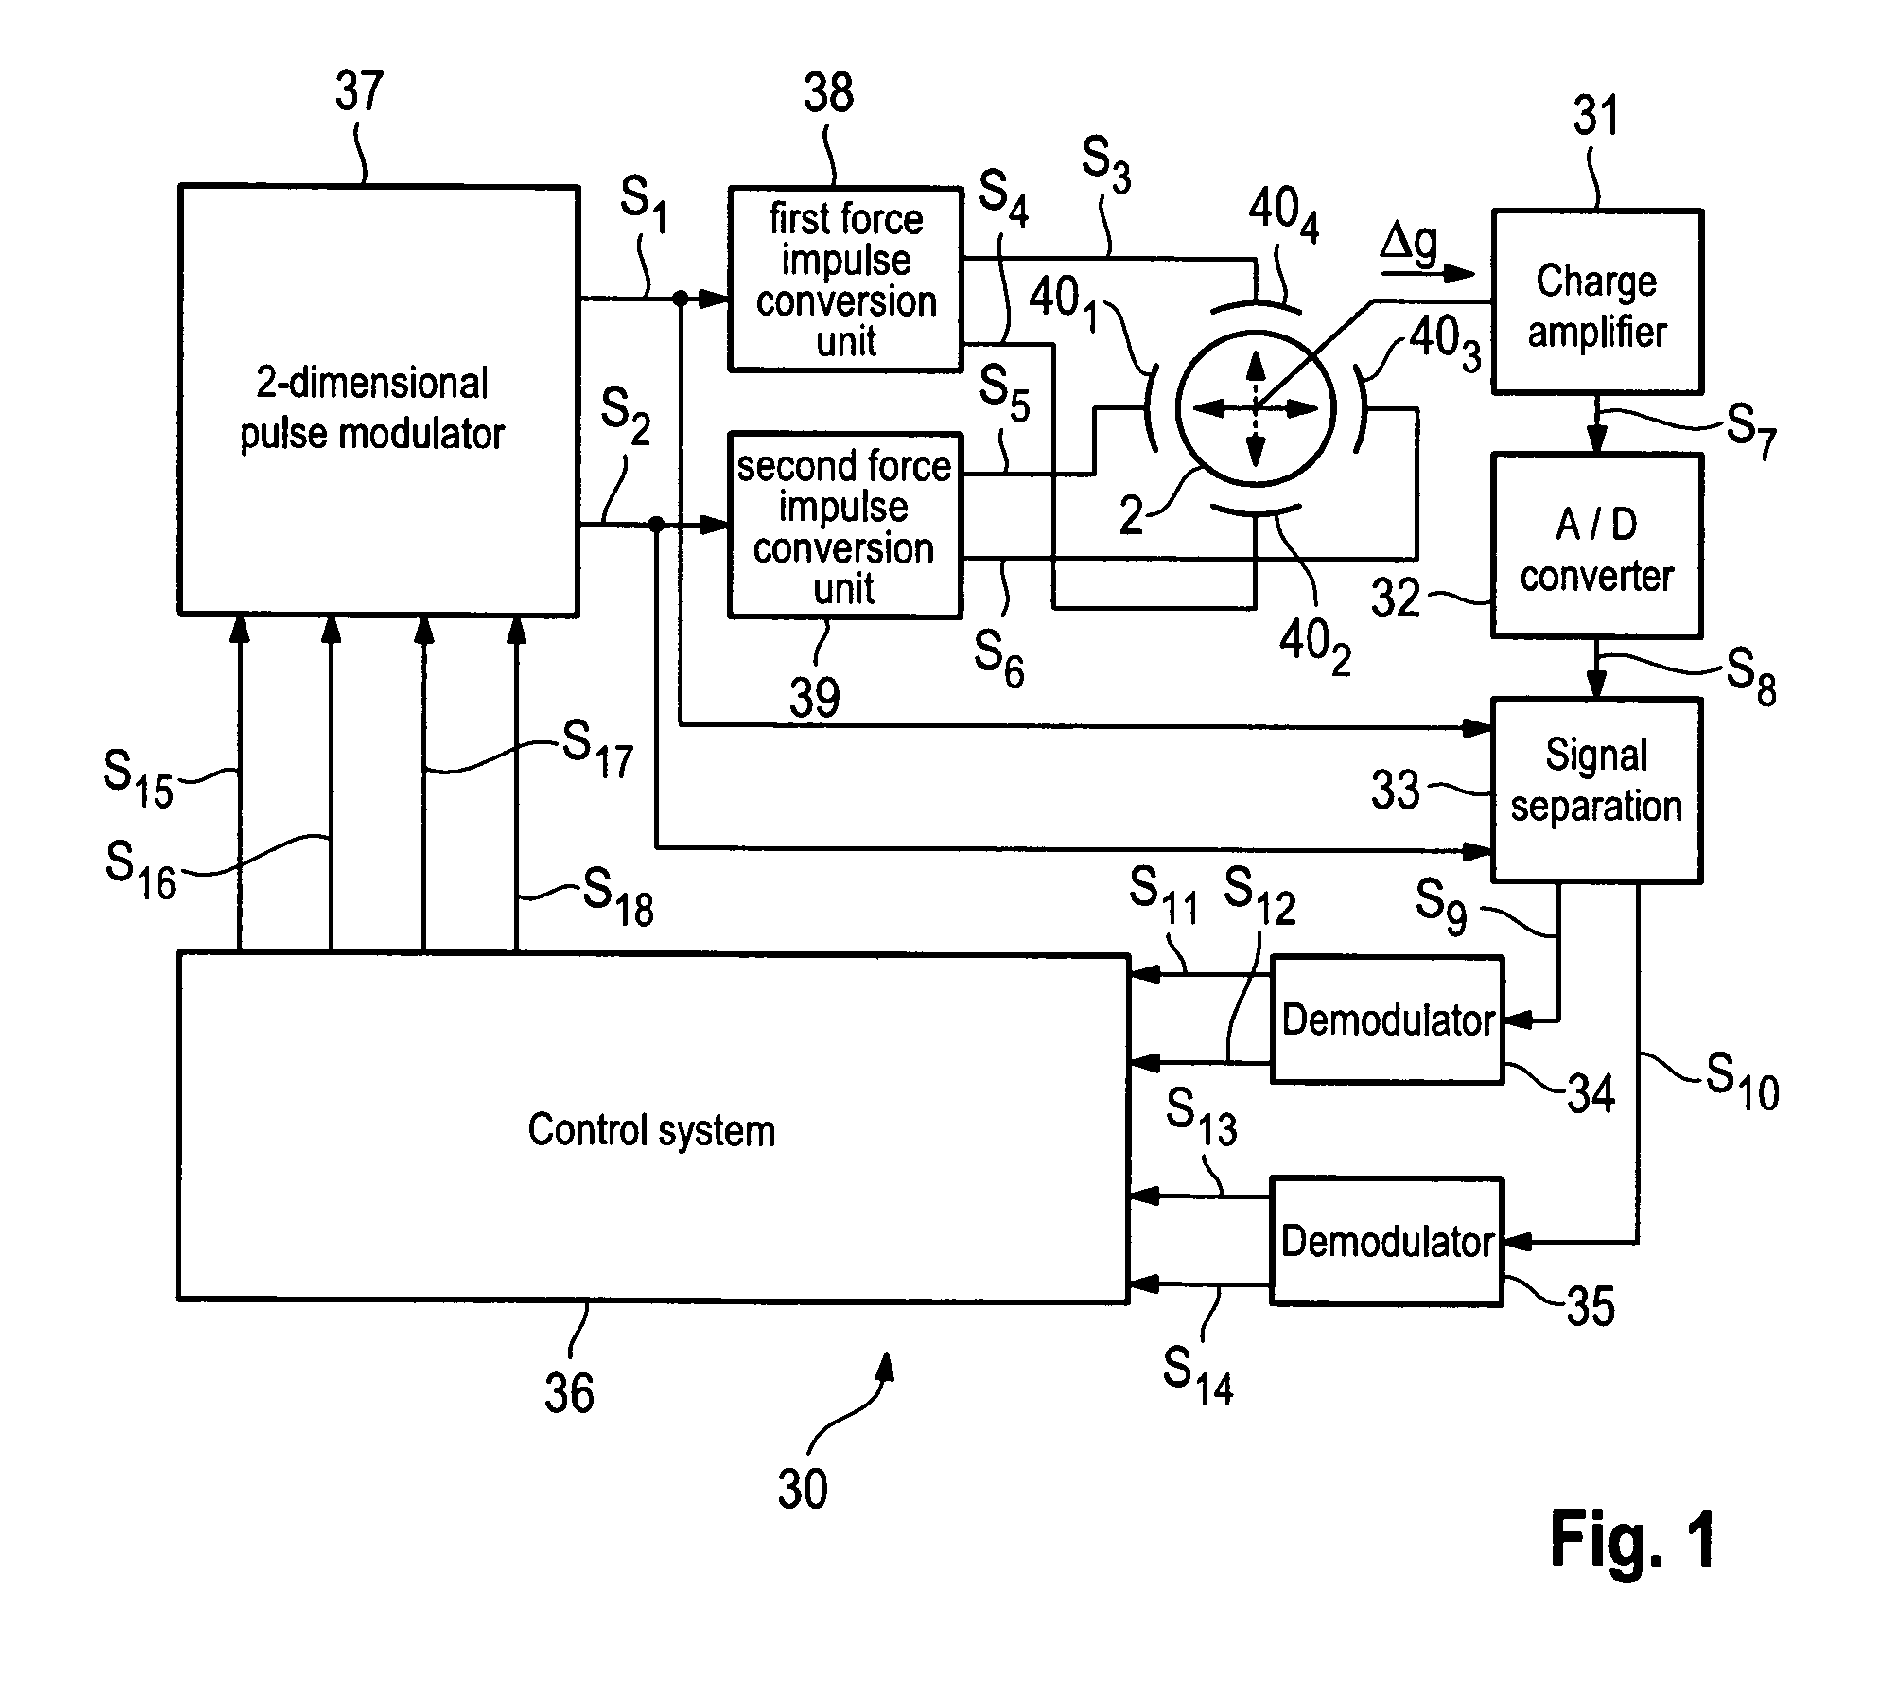 Operating method for a Coriolis gyro, and evaluation/control electronics which are suitable for this purpose